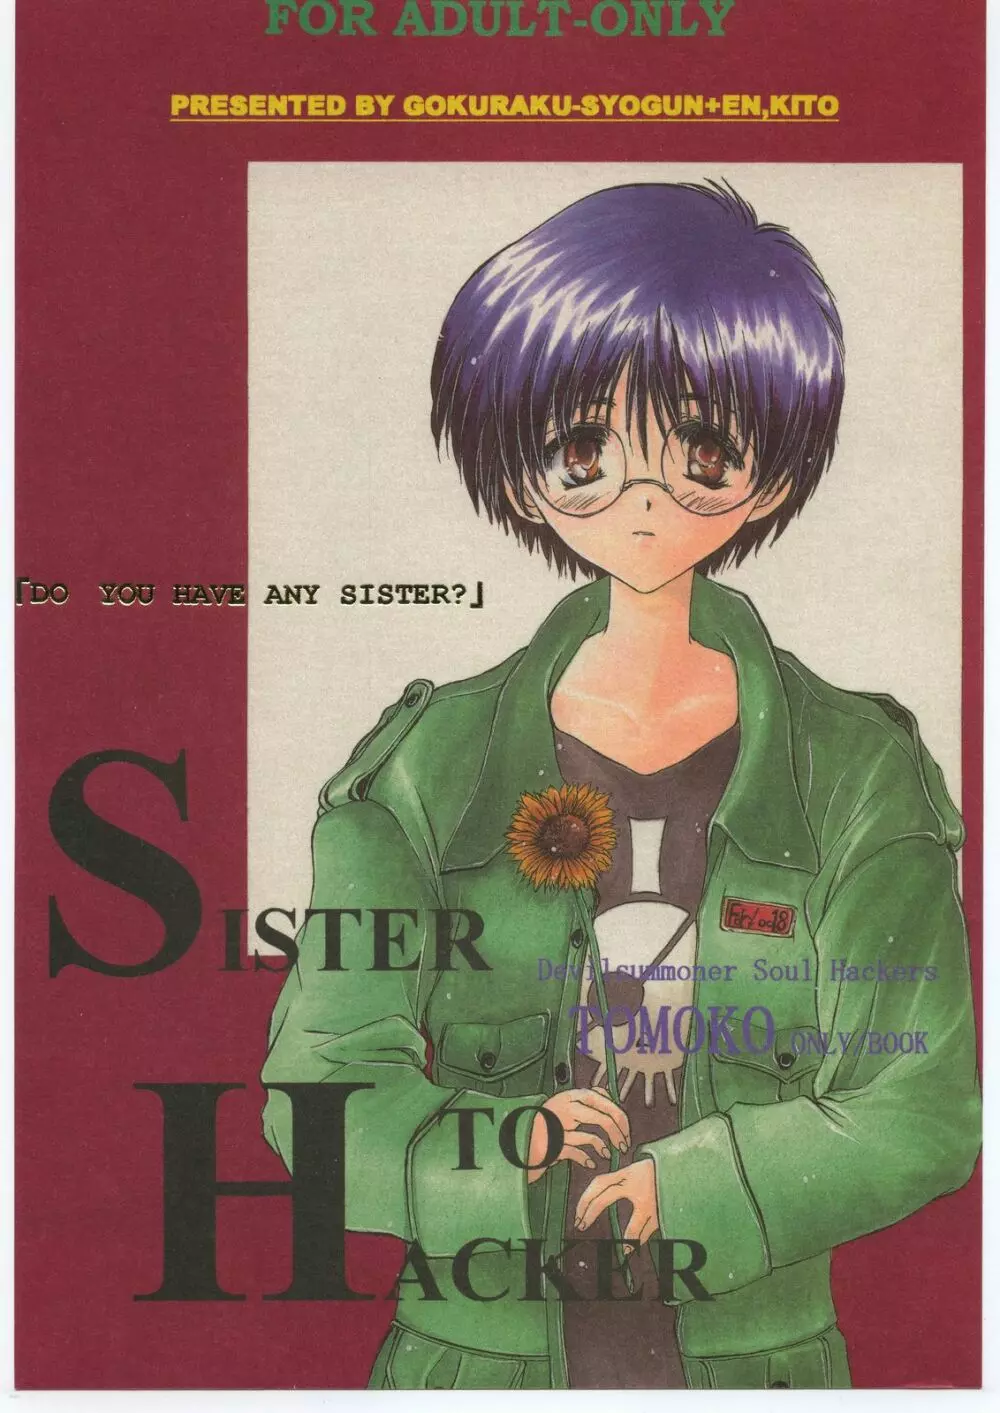 SISTER TO HACKER Page.1